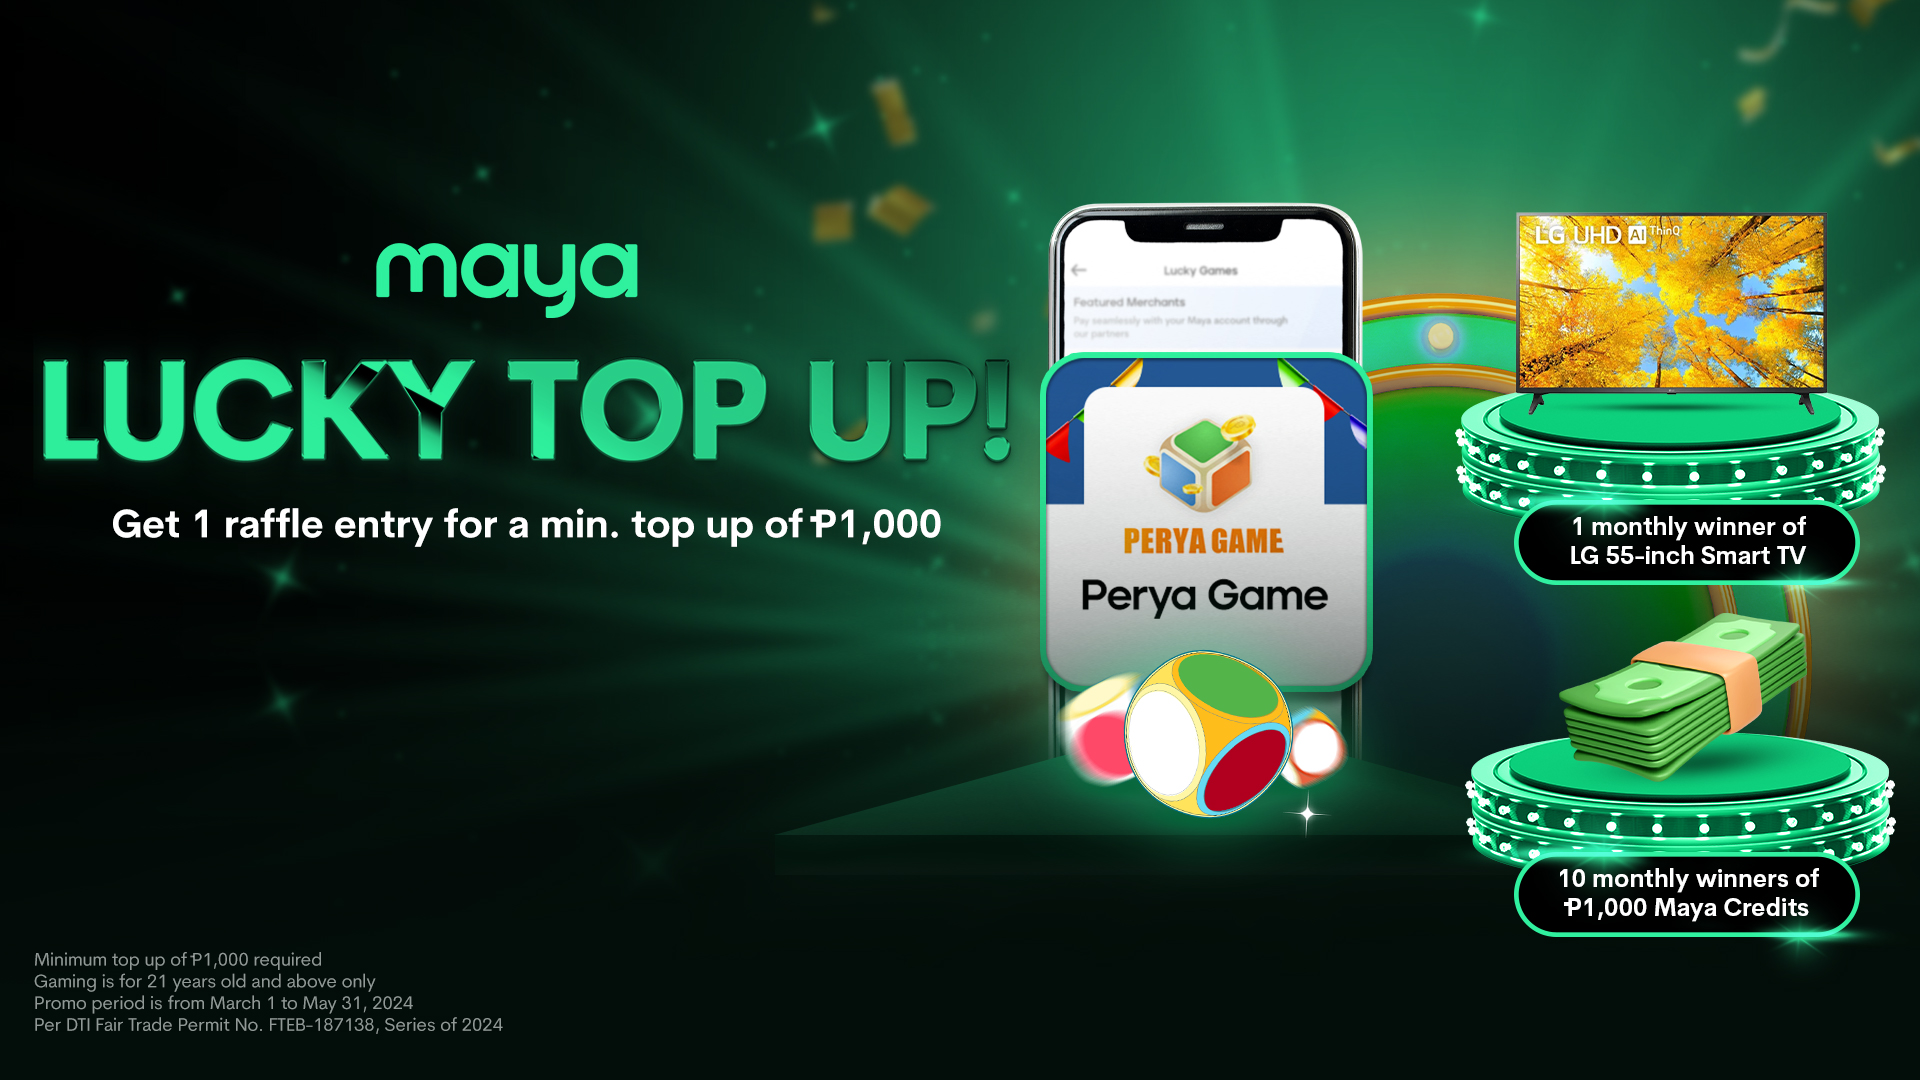 Top up your Perya Game wallet with Maya for a minimum of P1,000 and get one raffle entry